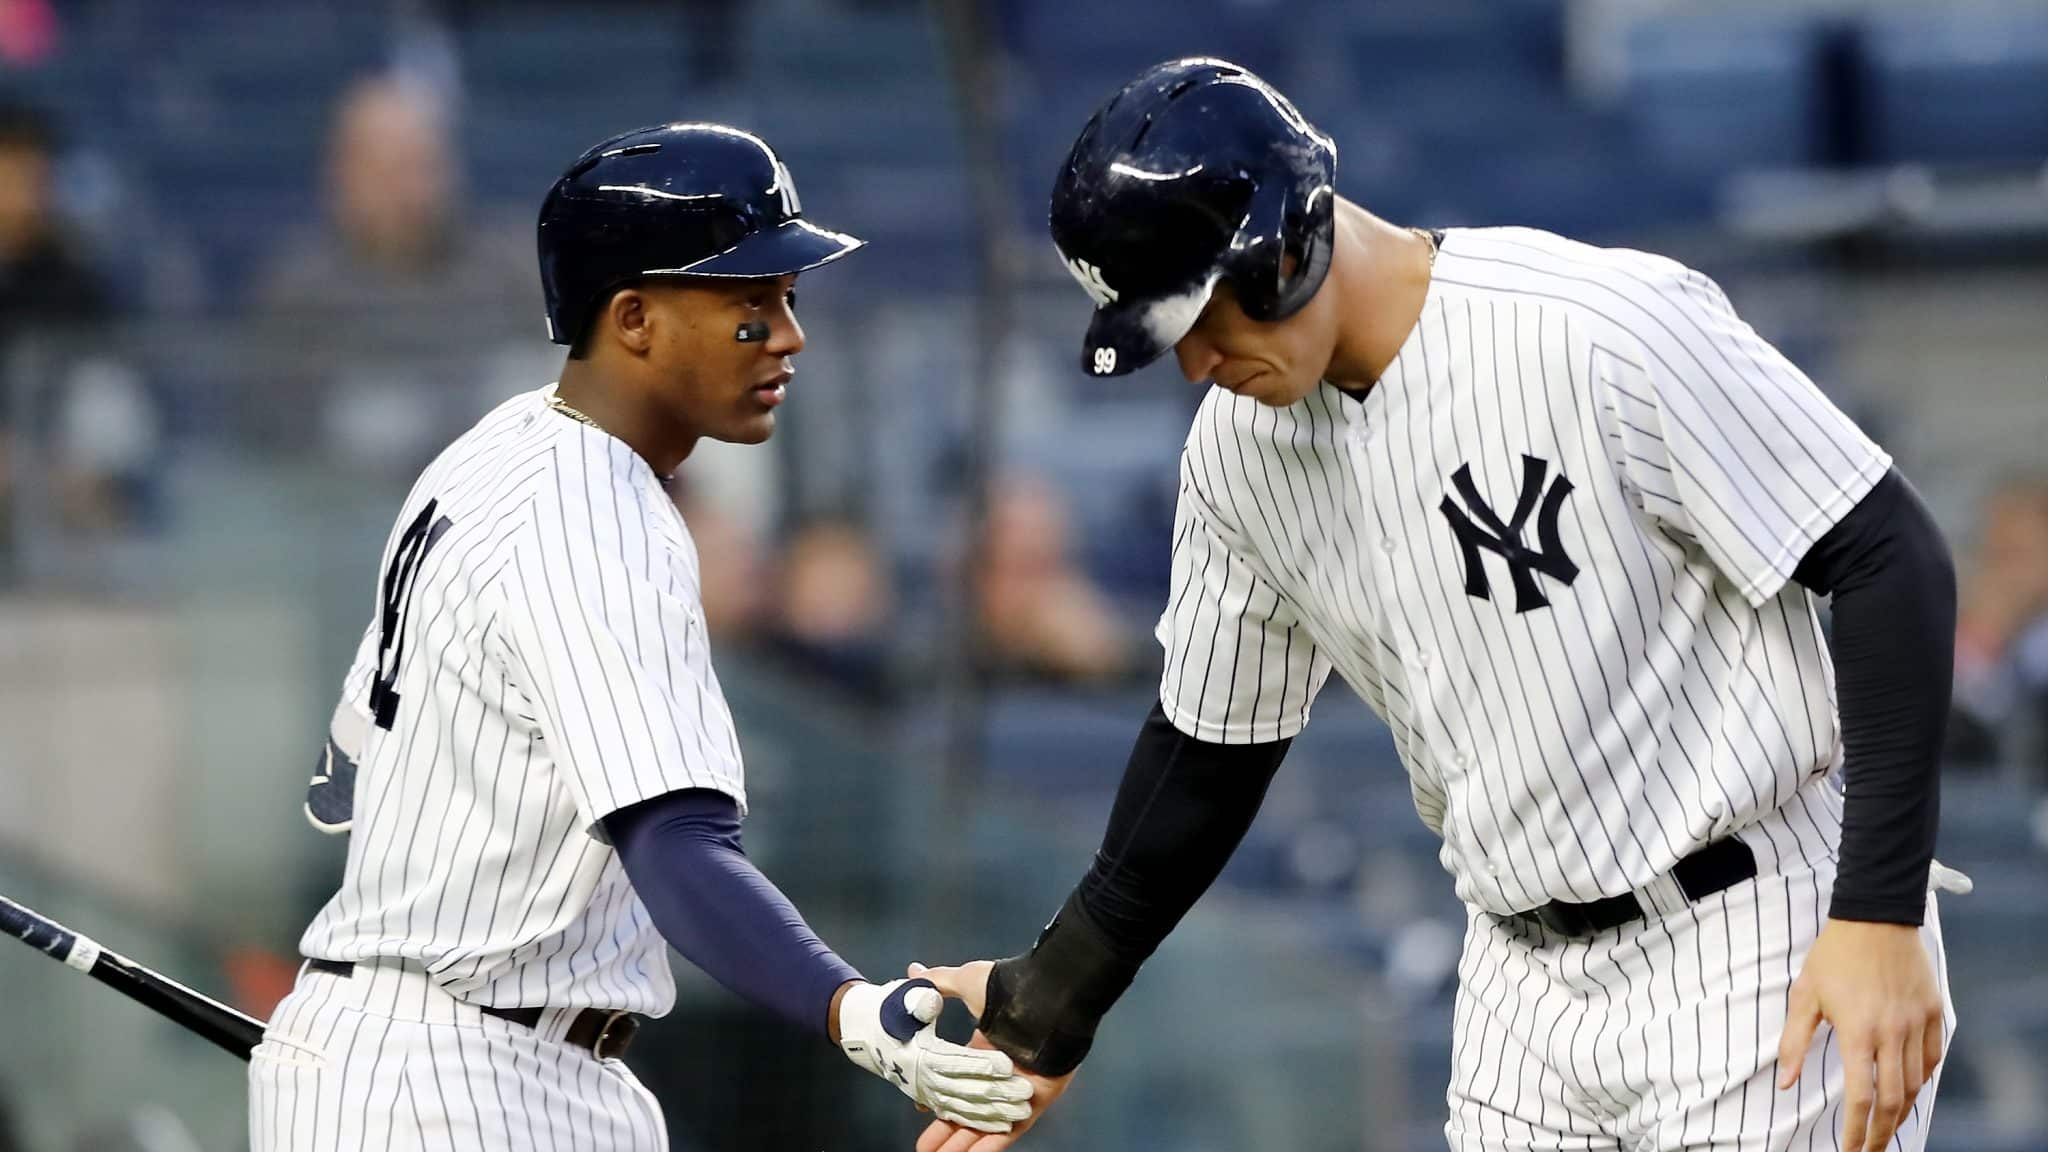 NEW YORK, NY - APRIL 16: Miguel Andujar #41 of the New York Yankees congratulates teammate Aaron Judge #99 after he scored on a bases loaded walk in the first inning against the Miami Marlins at Yankee Stadium on April 16, 2018 in the Bronx borough of New York City.